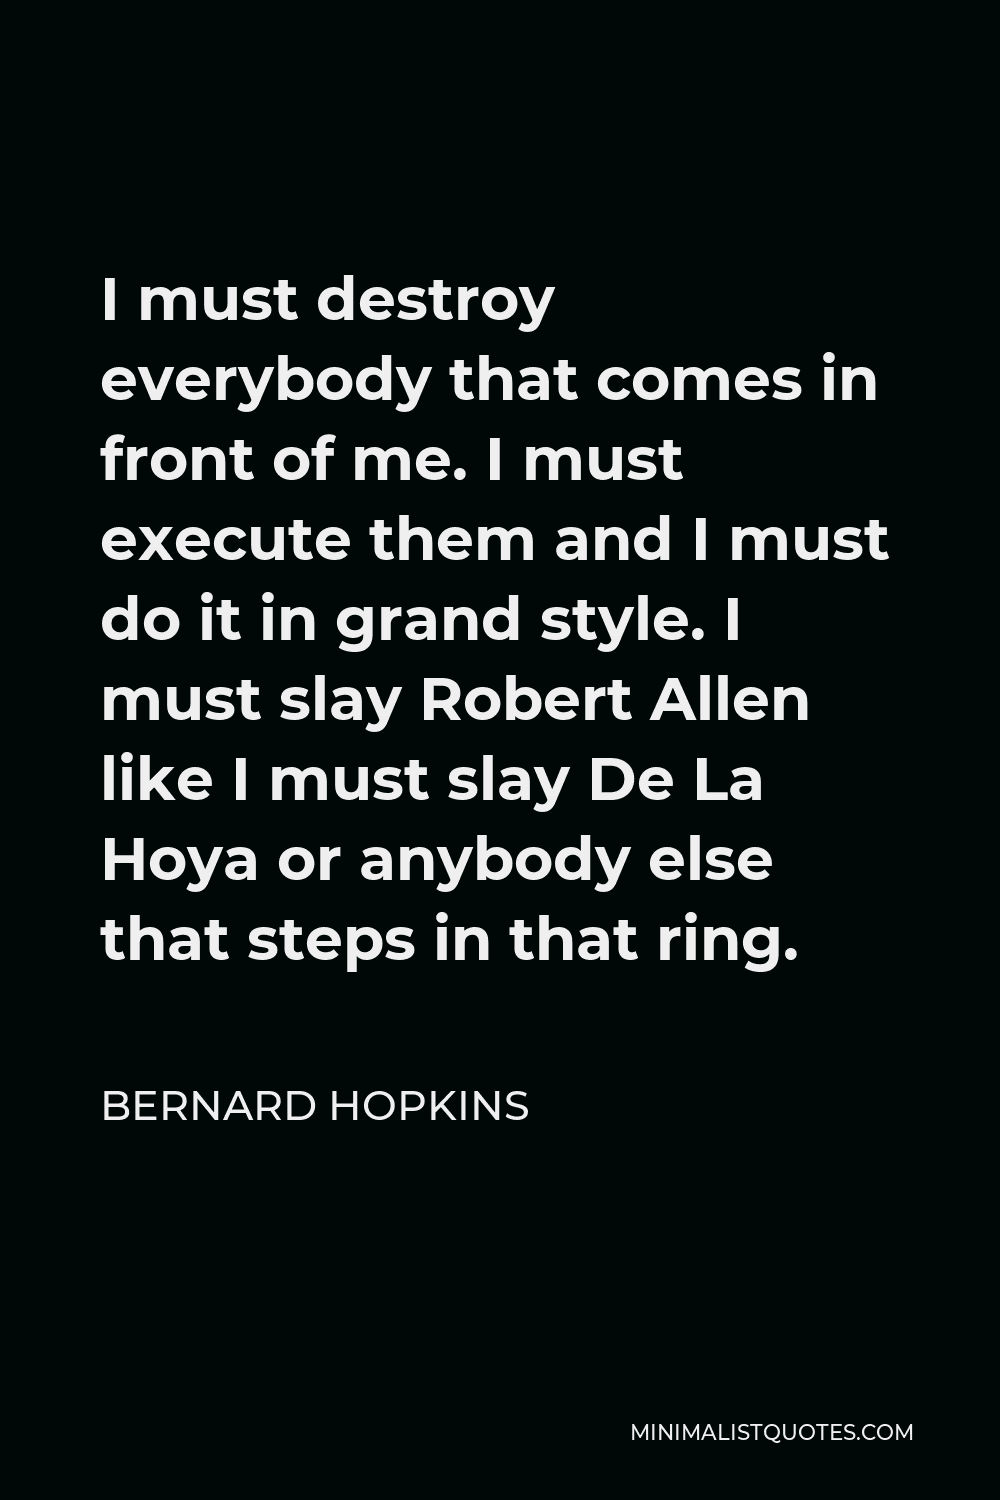 Bernard Hopkins Quote - I must destroy everybody that comes in front of me. I must execute them and I must do it in grand style. I must slay Robert Allen like I must slay De La Hoya or anybody else that steps in that ring.